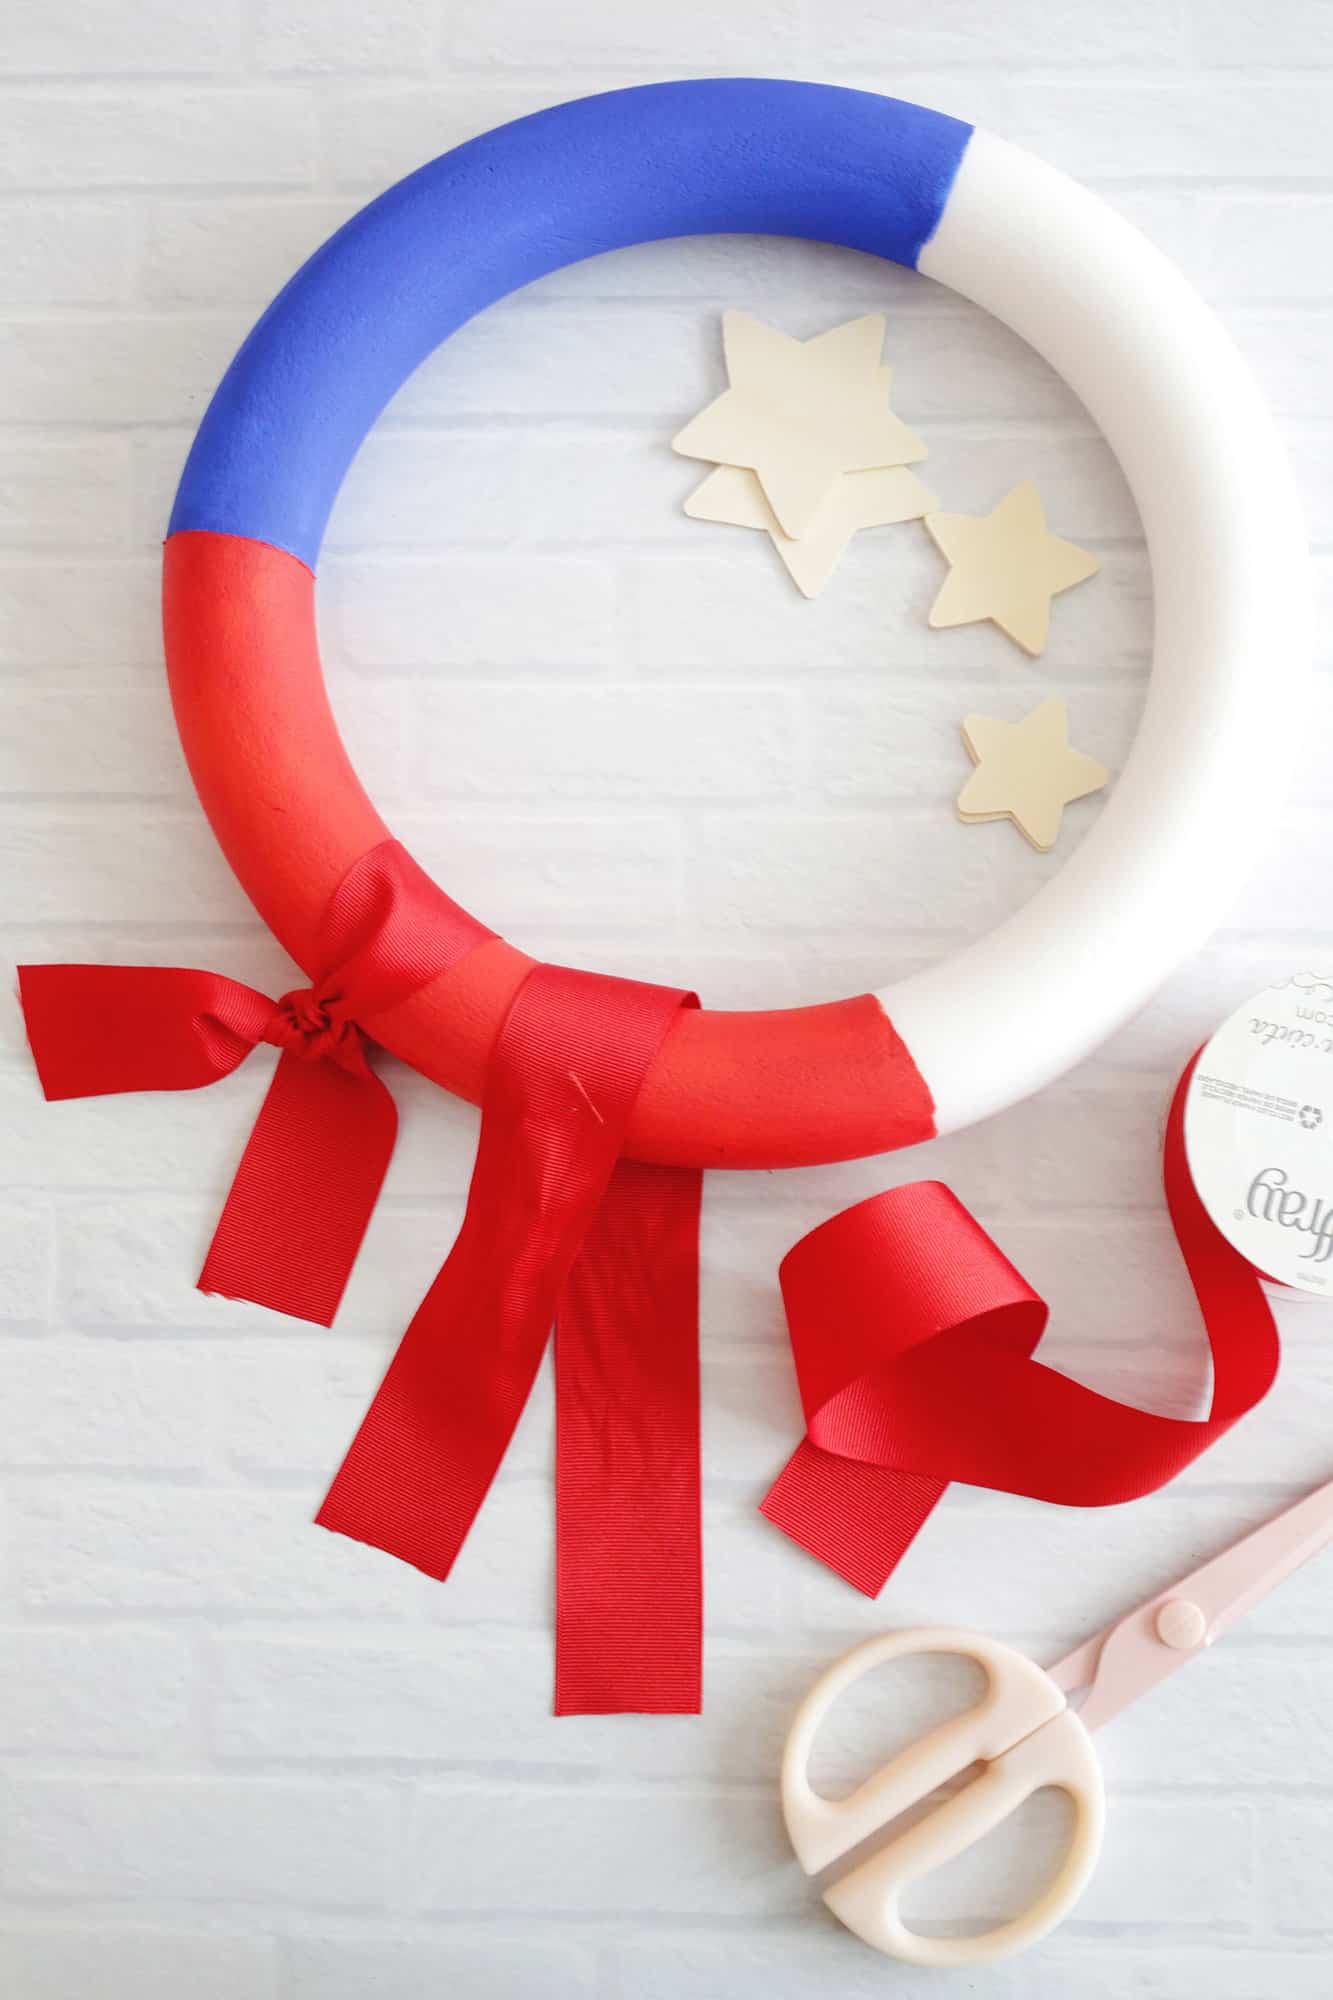 tie a red ribbon around the wreath